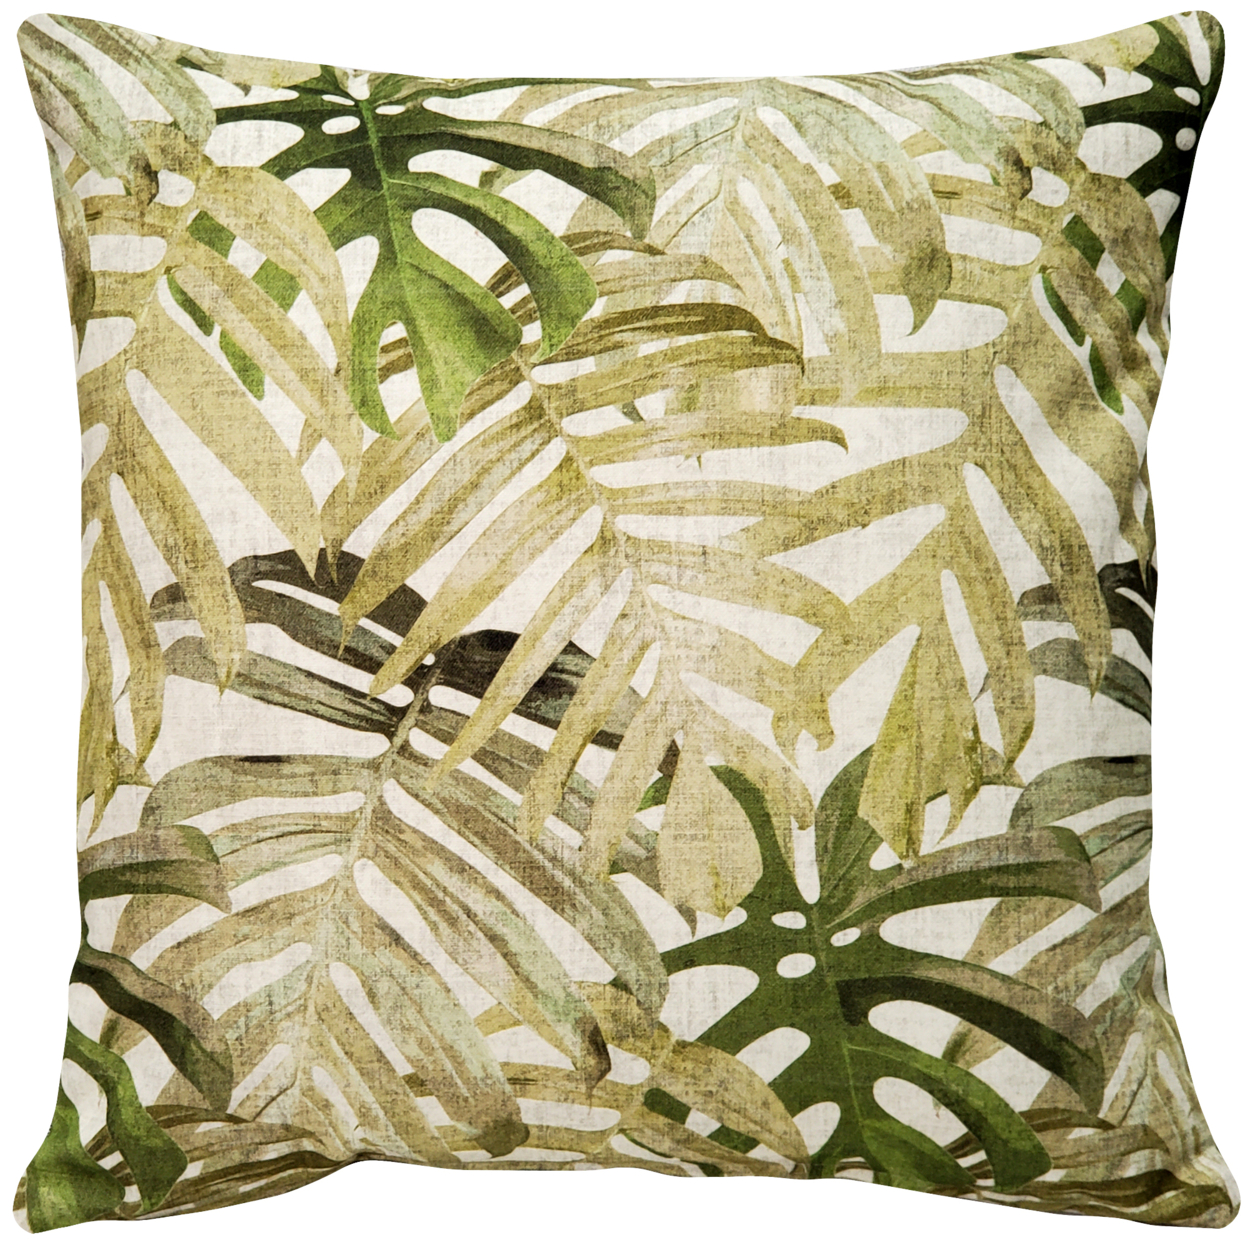 Pattaya Green Palm Throw Pillow 20x20 Inches Square, Complete Pillow With Polyfill Pillow Insert